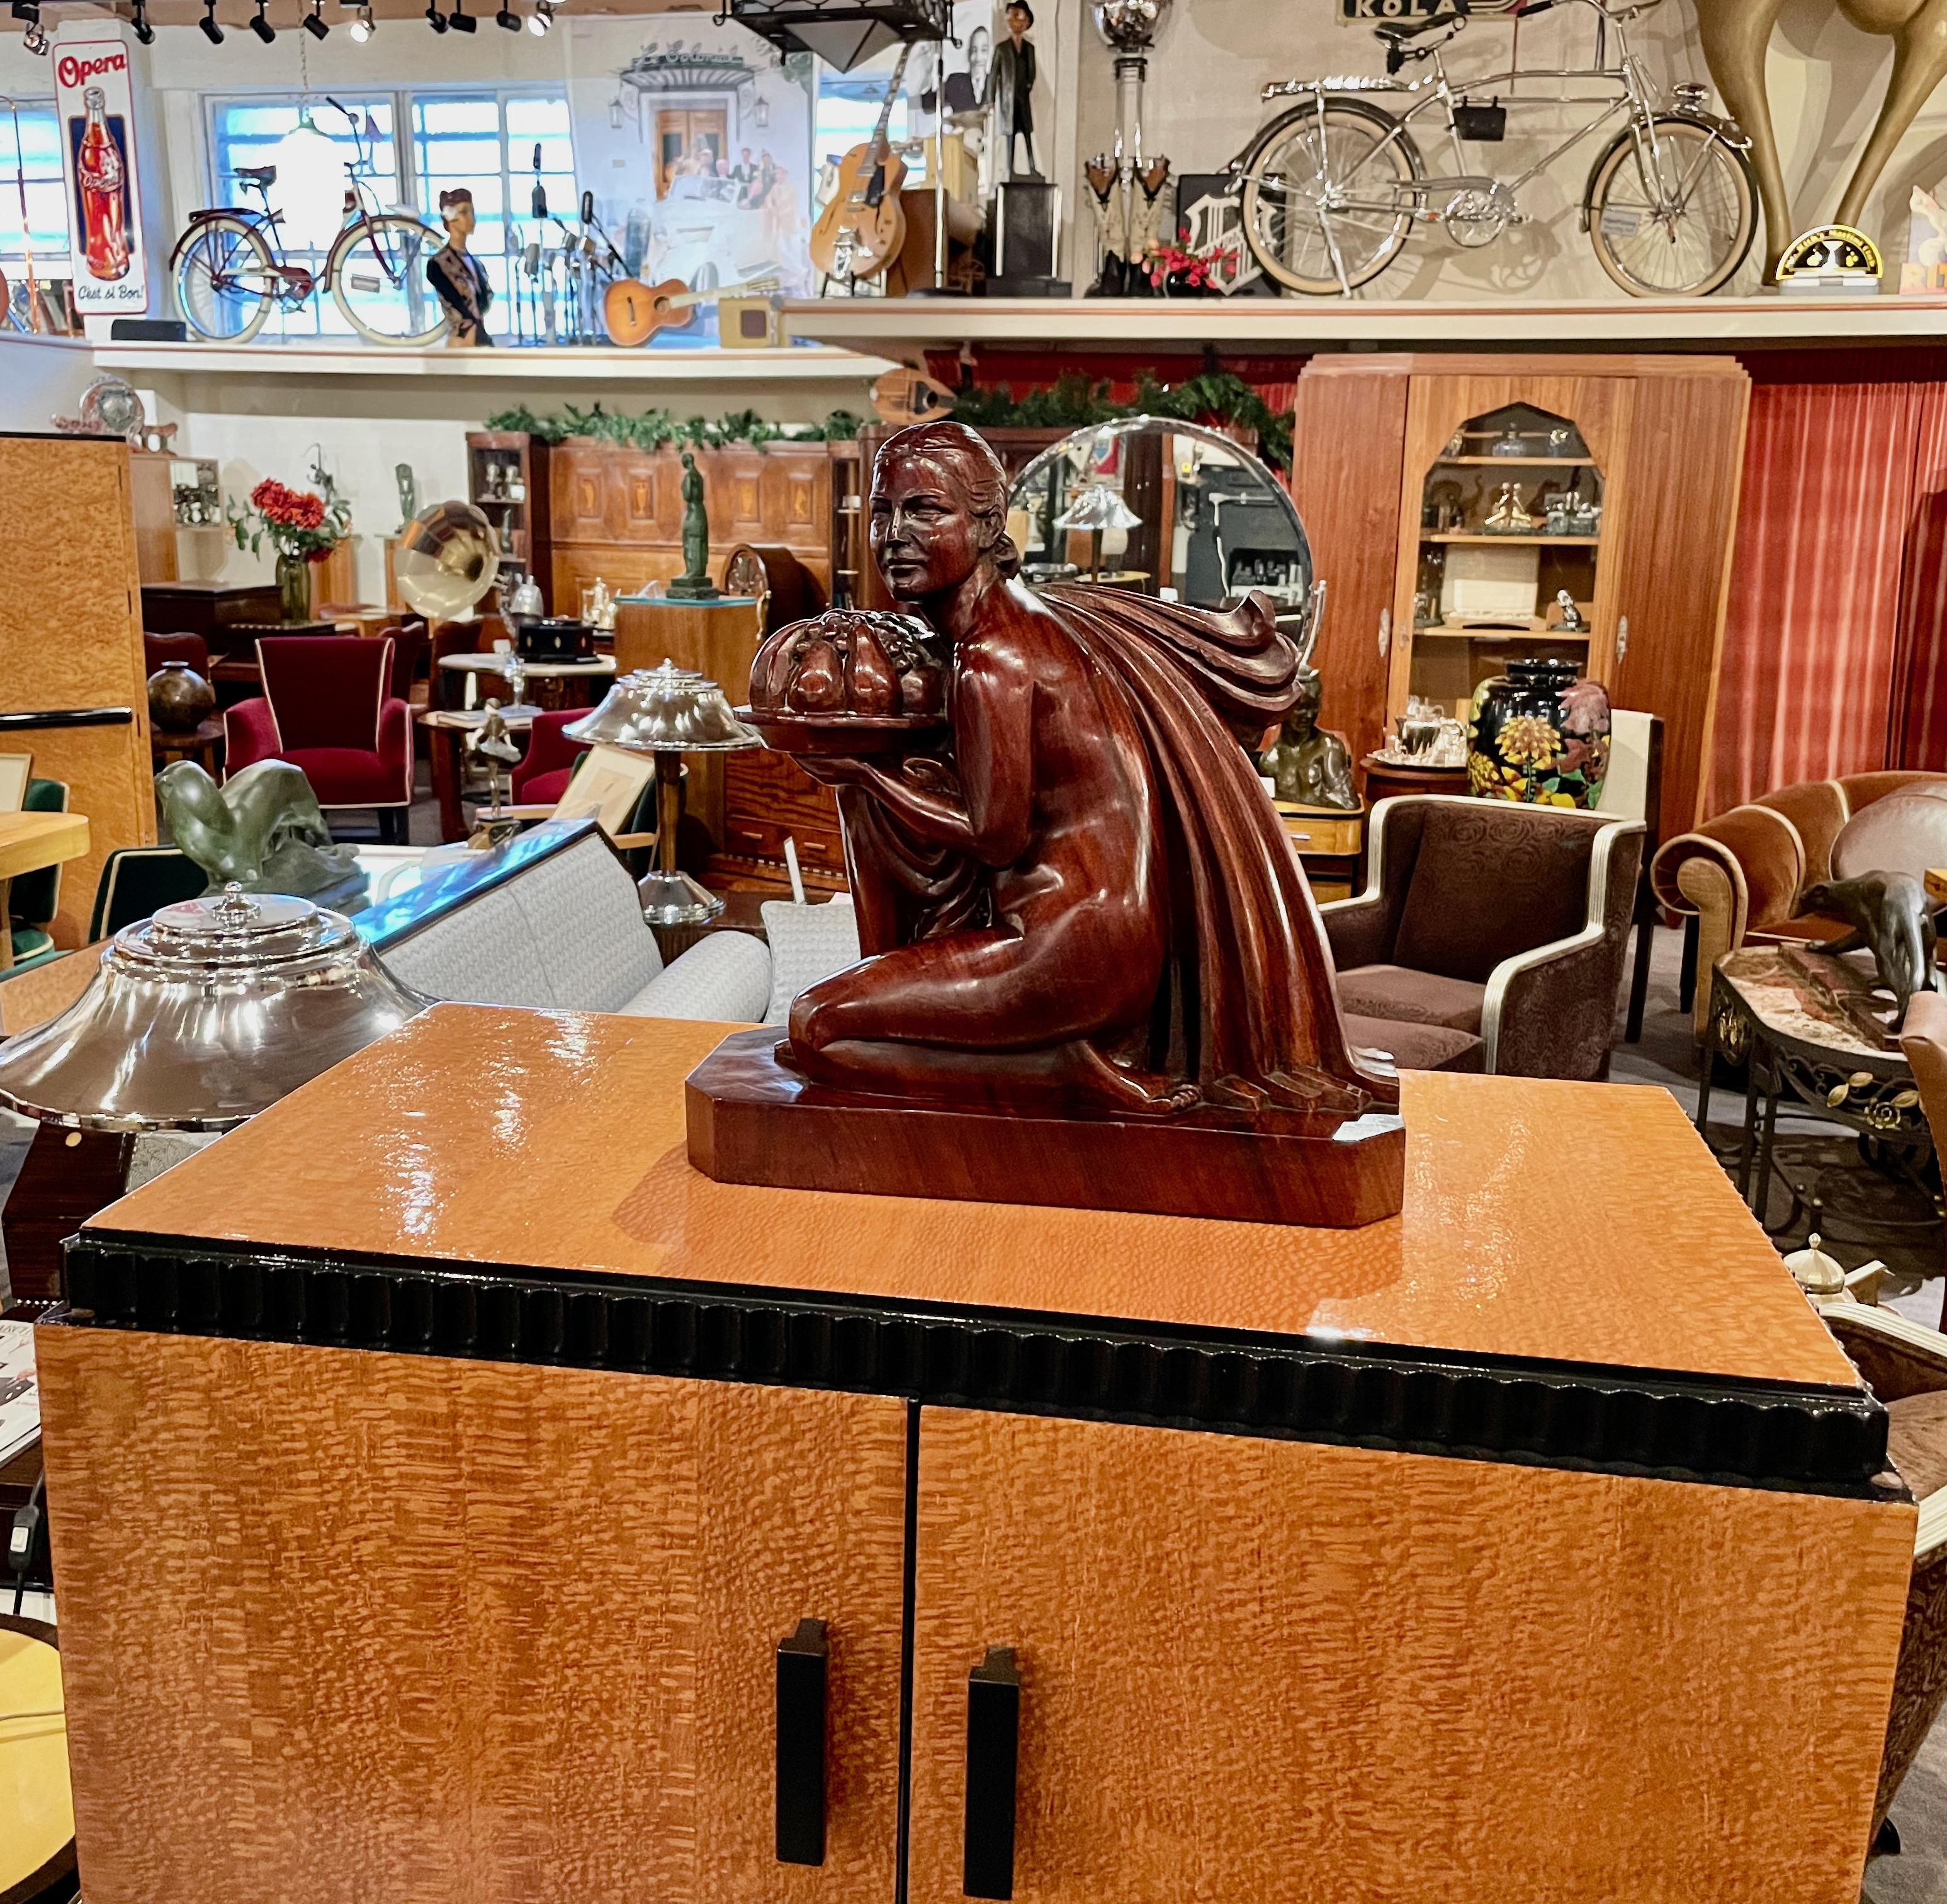 French Art Deco statue hand carved rosewood woman with fruit by G. Verez. Design circa 1925, inspired by the French International Exhibition of Modern Decorative and Industrial Arts (The Exposition Internationale des Arts Décoratifs et Industriels